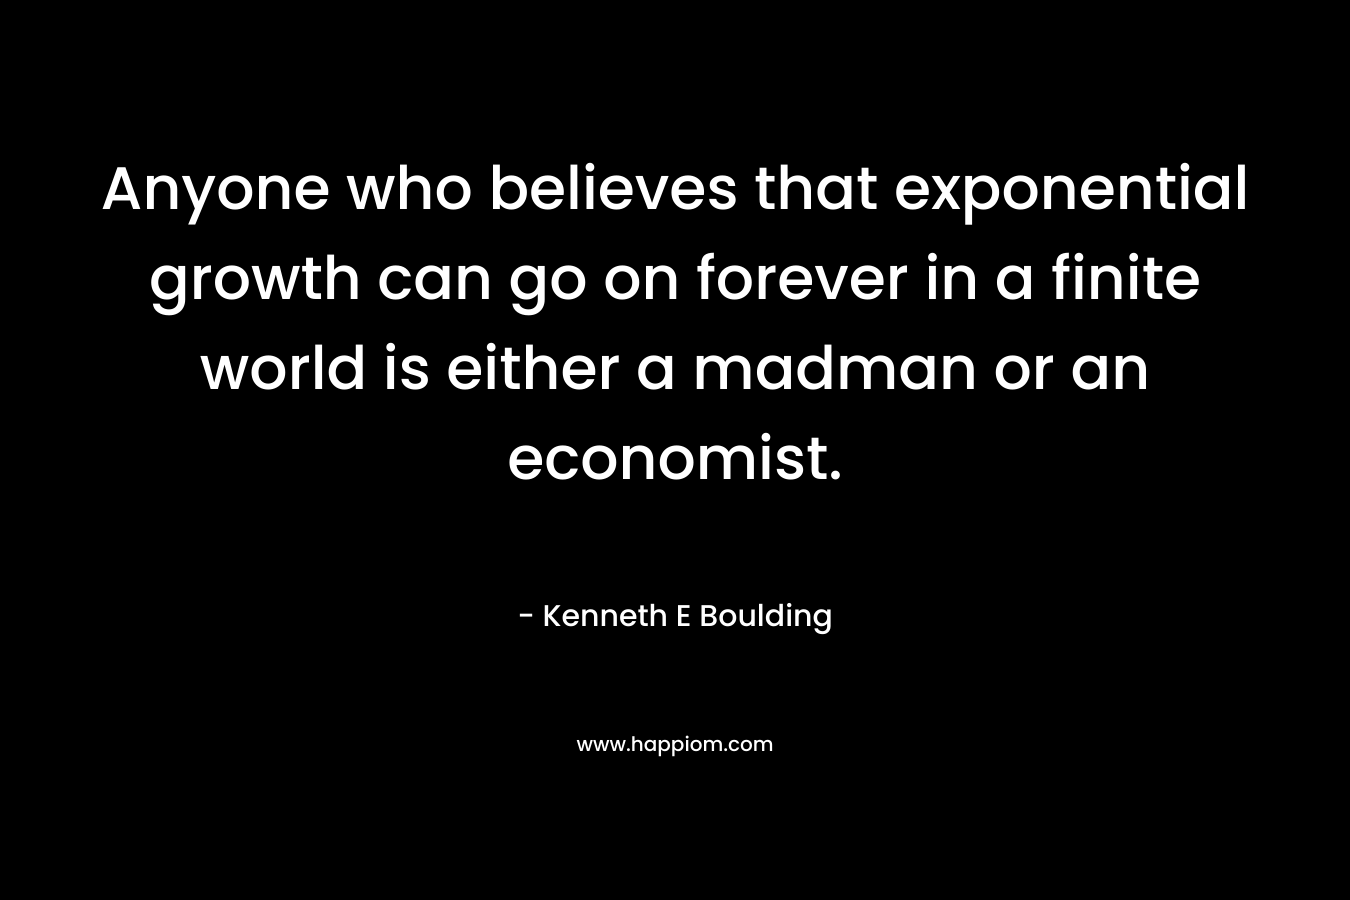 Anyone who believes that exponential growth can go on forever in a finite world is either a madman or an economist. – Kenneth E Boulding